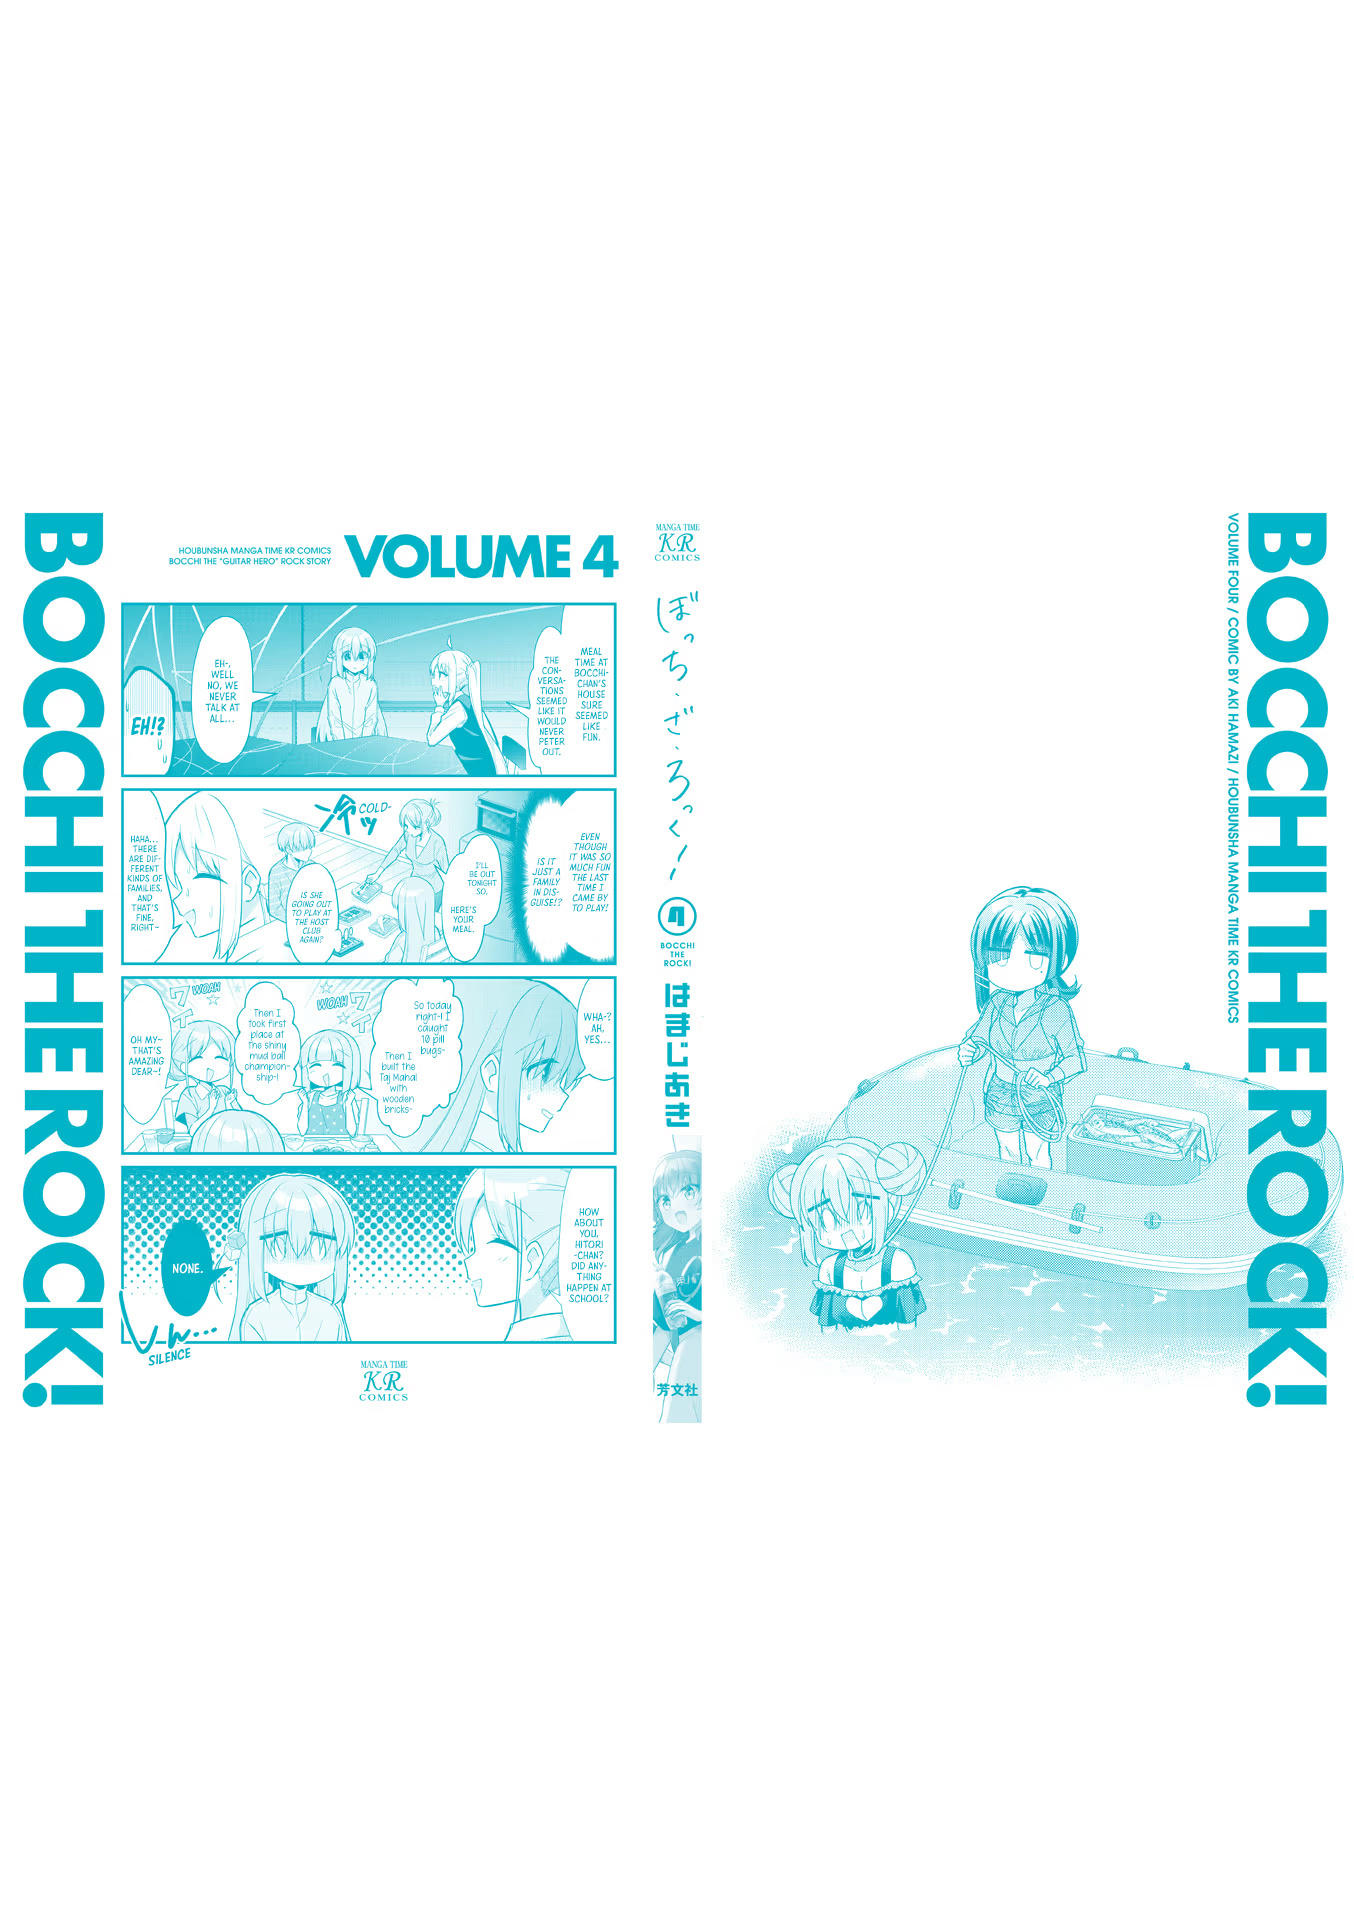 Bocchi The Rock  Chapter 50.5: Volume 4 Extras page 5 - 